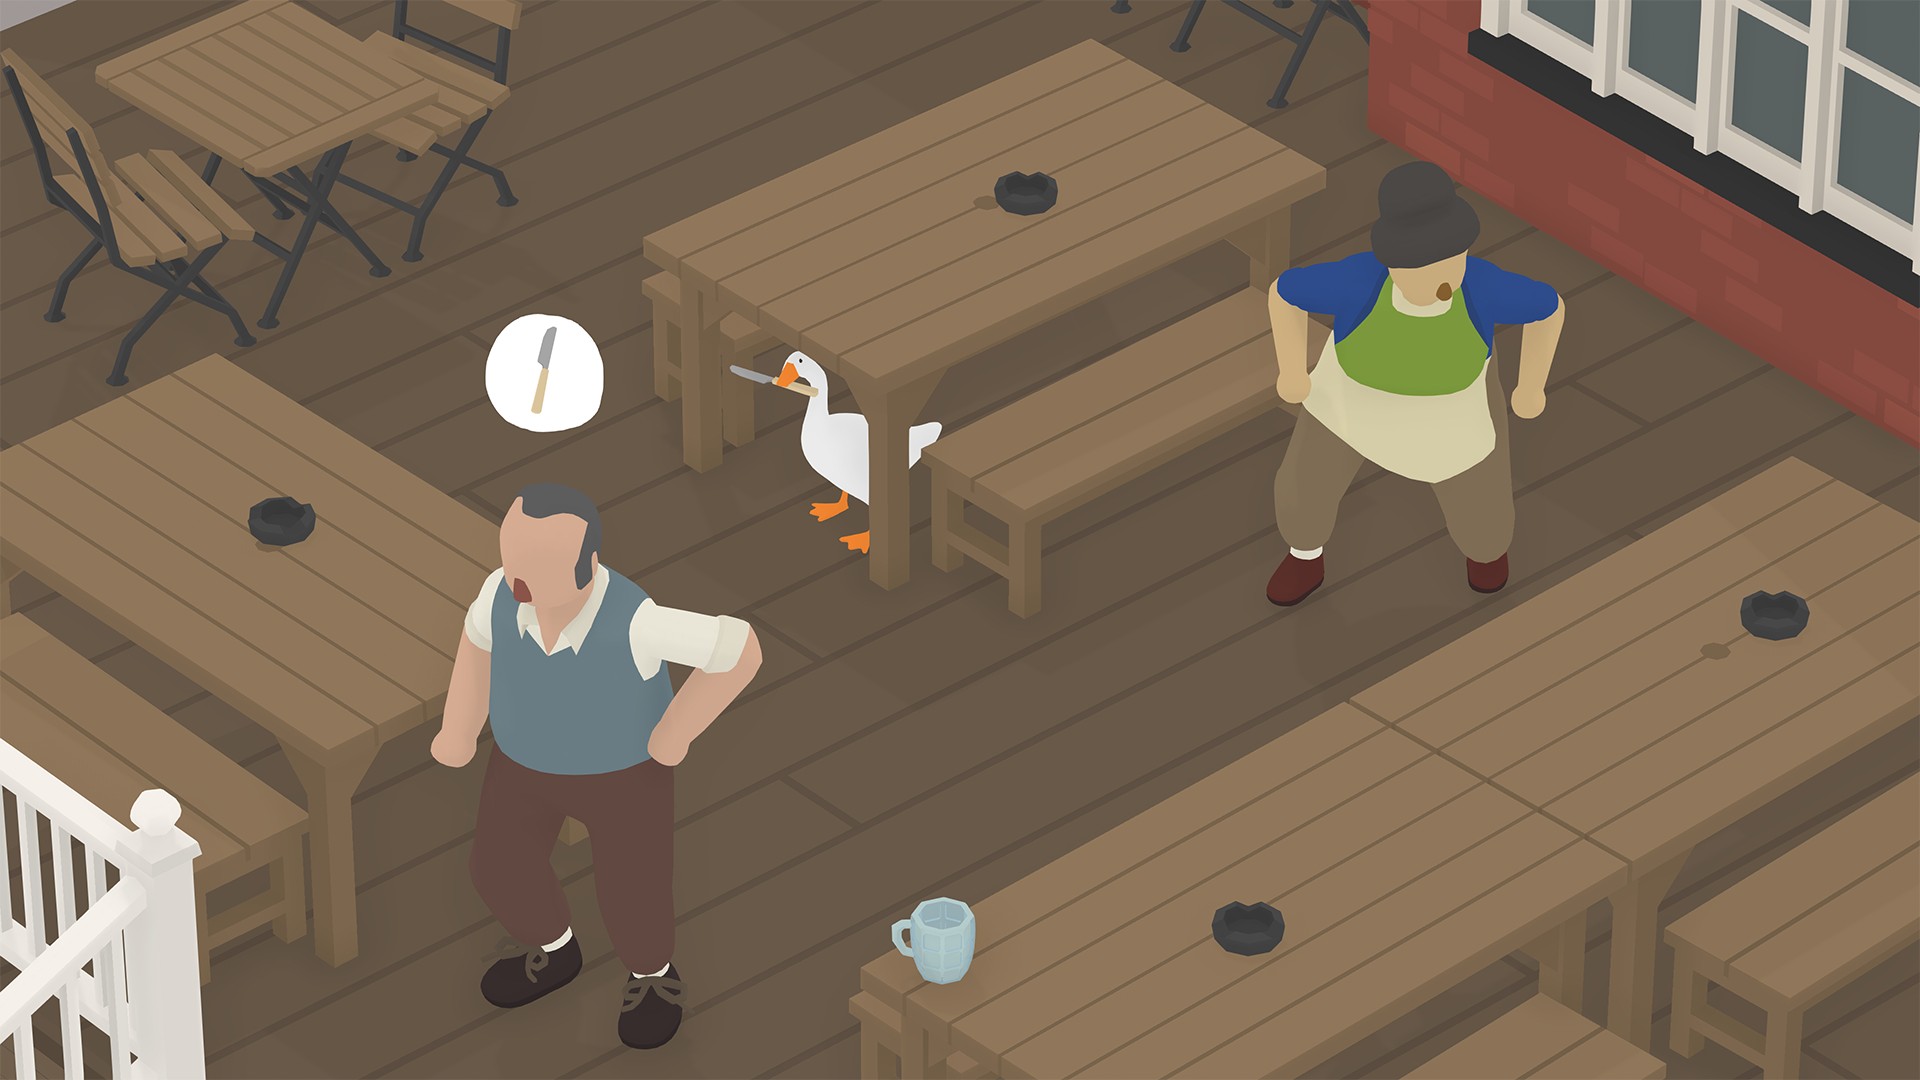 untitled goose game xbox one release date